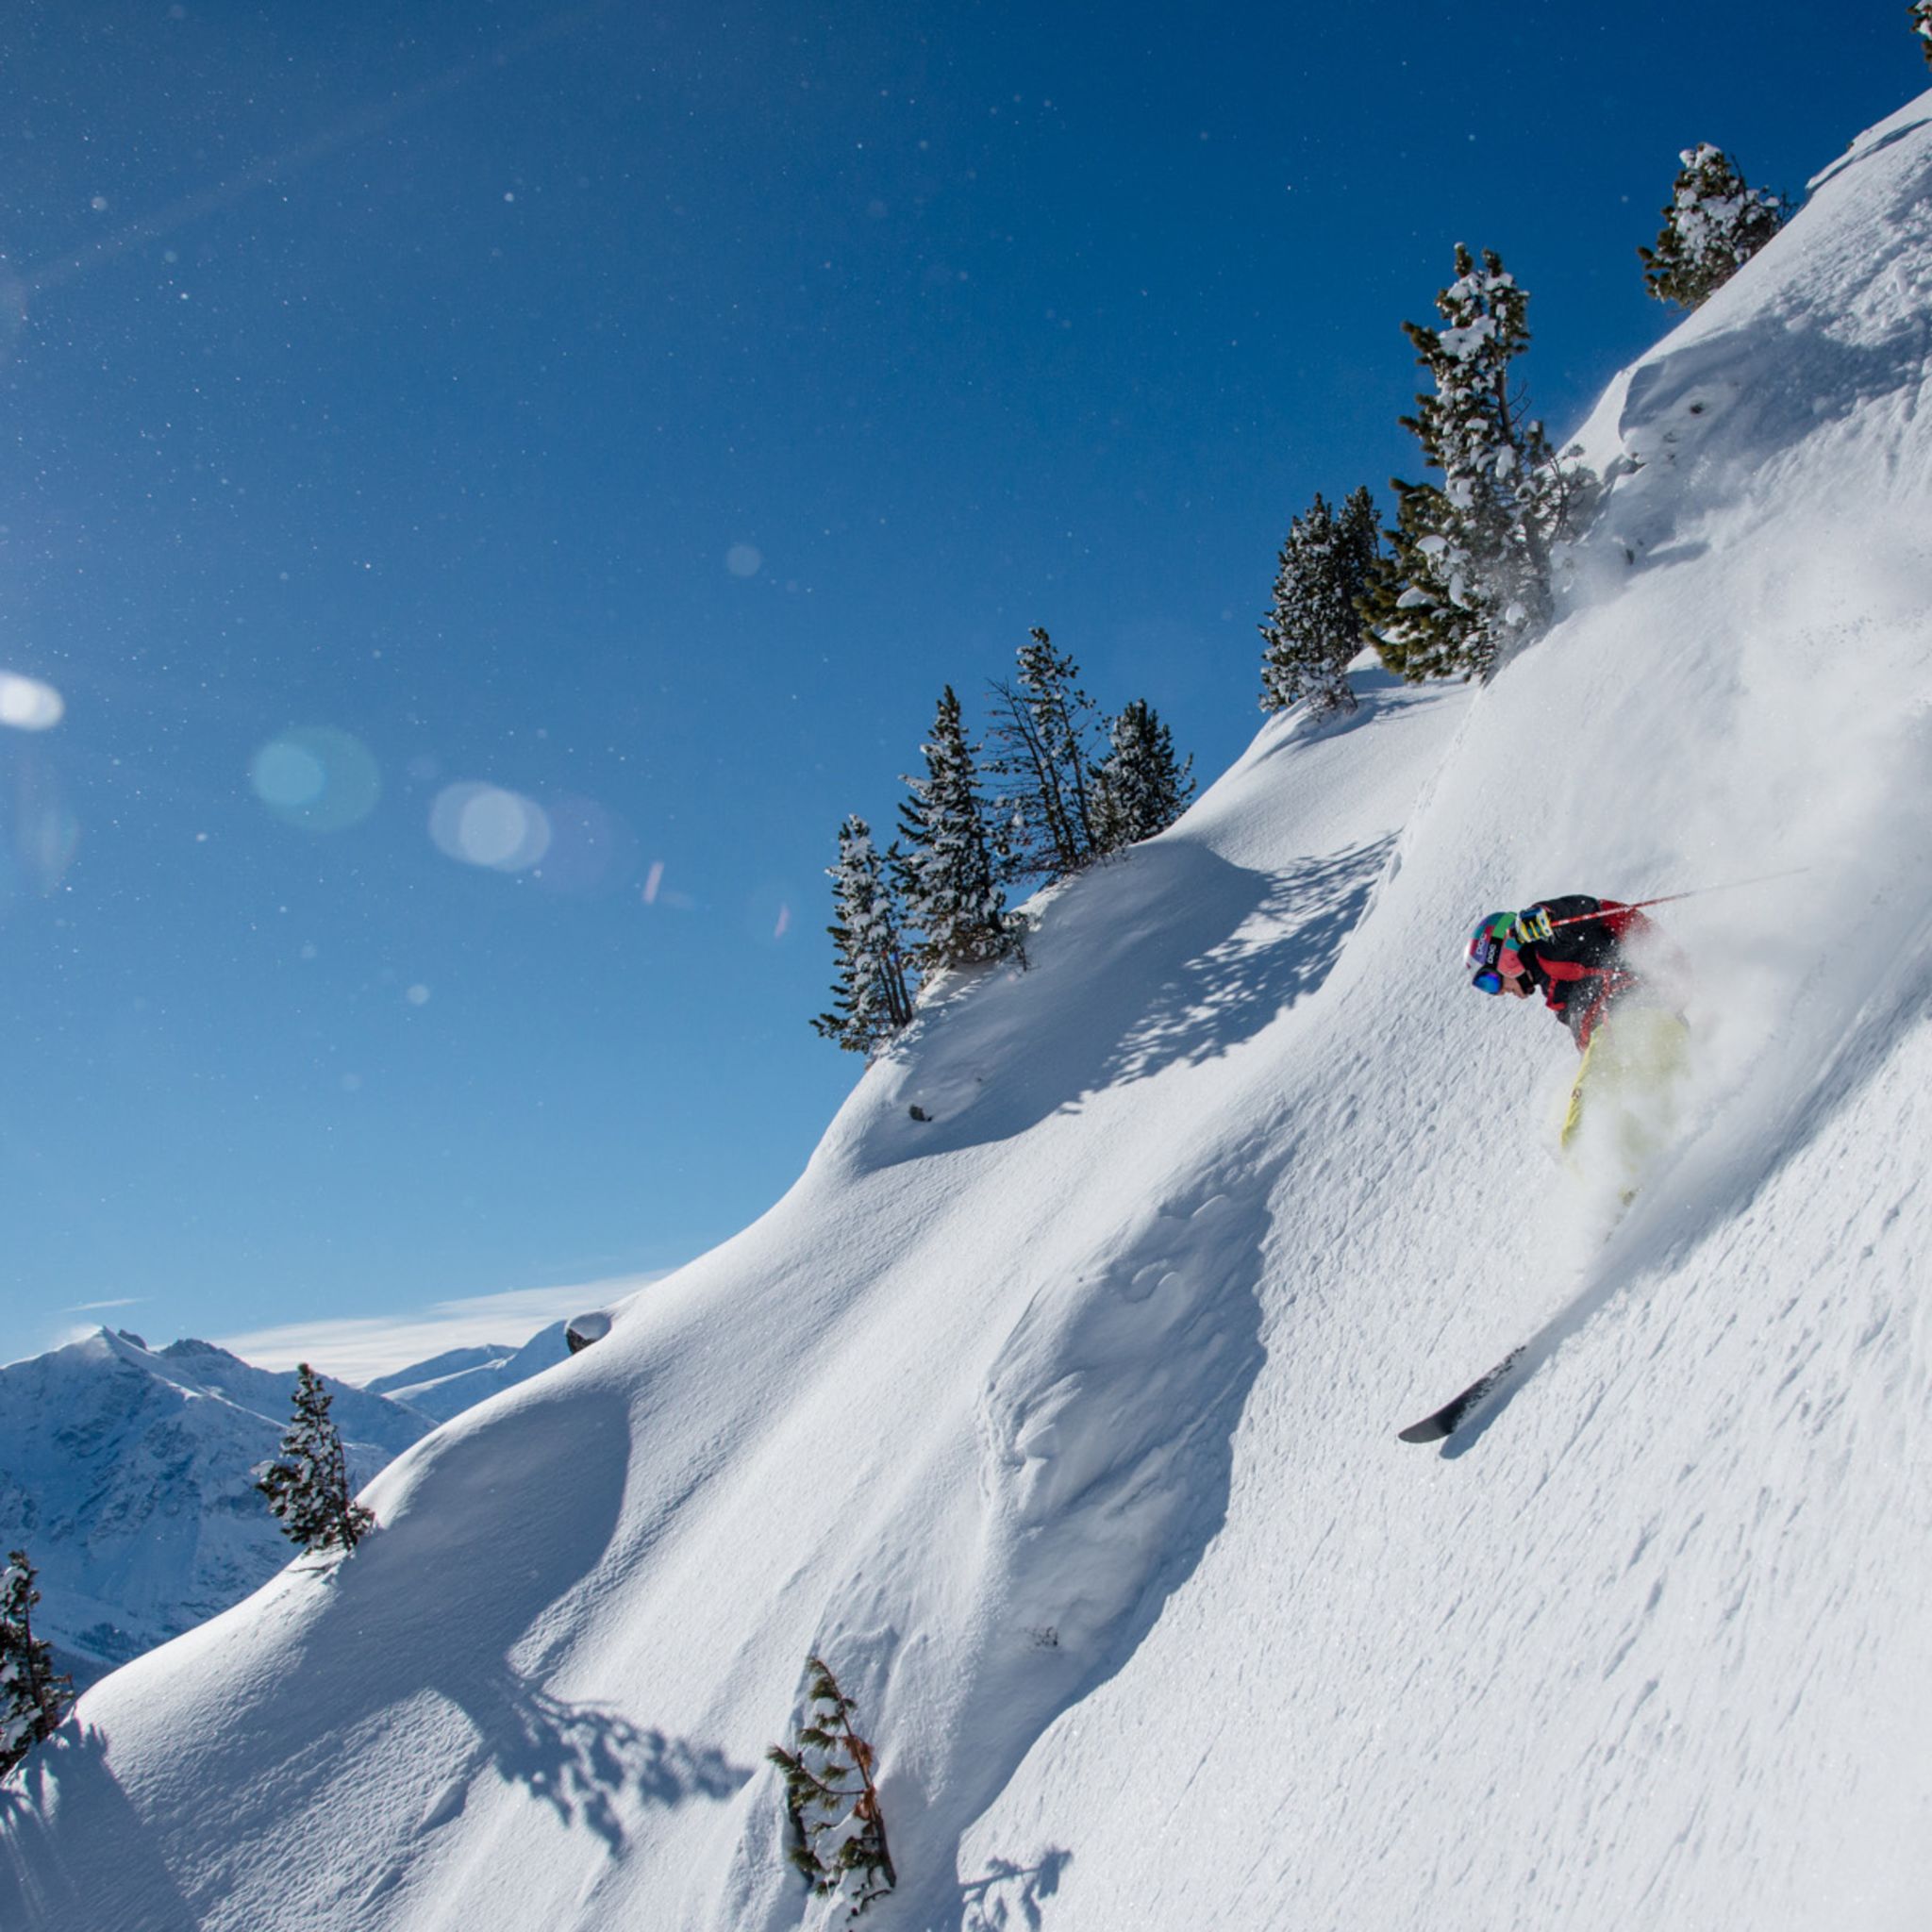 Amélie freeriding Telemark-style in the Thyon region. "I can't imagine anything more beautiful," the champion racer says